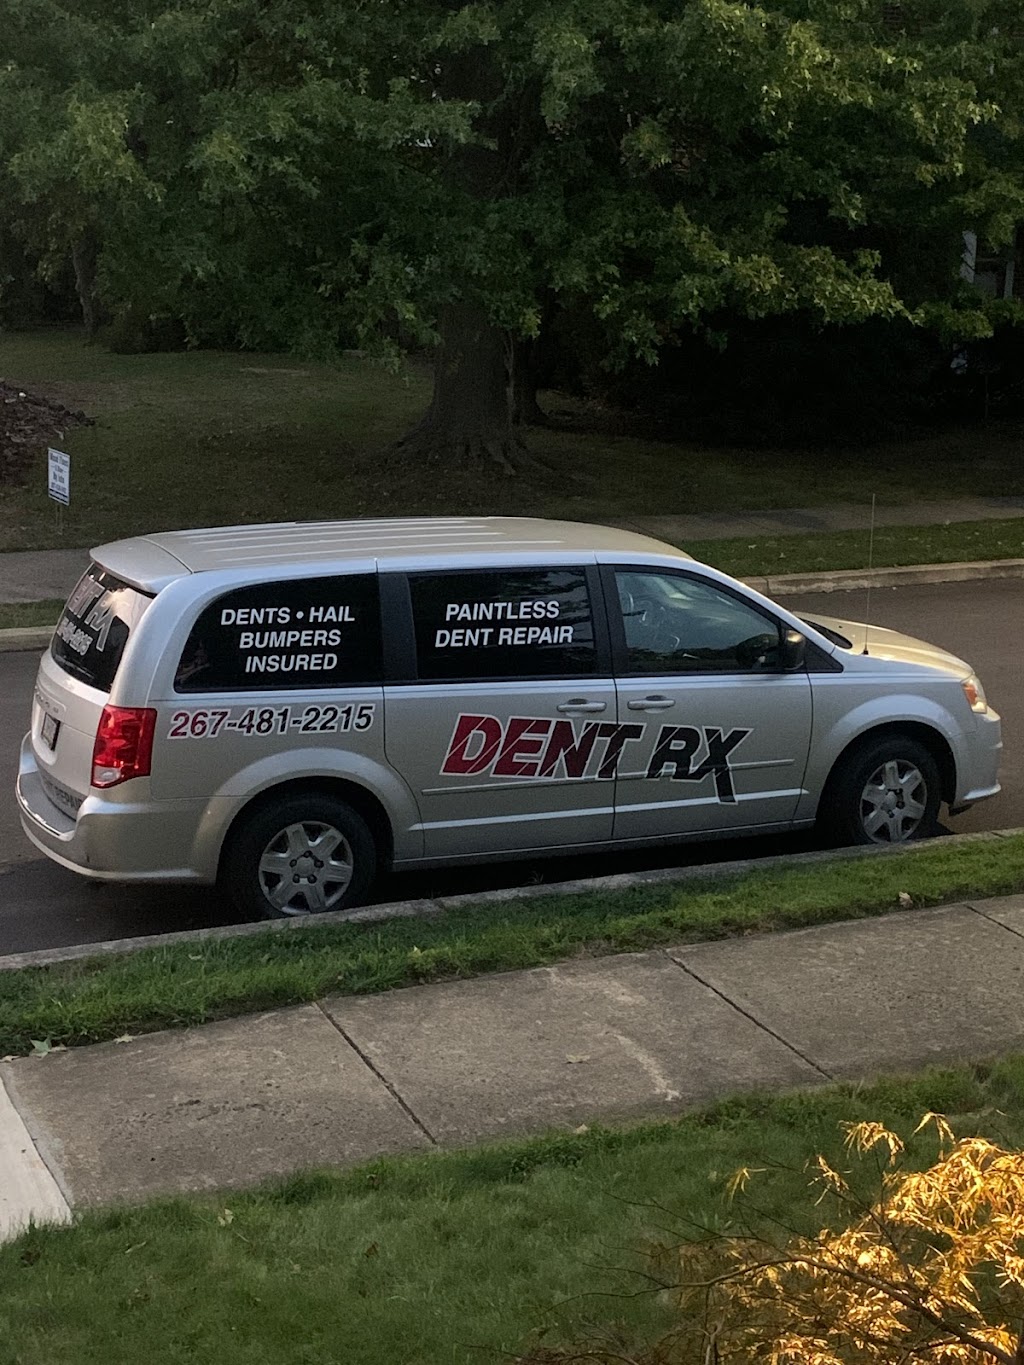 Dent Rx | 345 W Montgomery Ave, North Wales, PA 19454 | Phone: (267) 481-2215